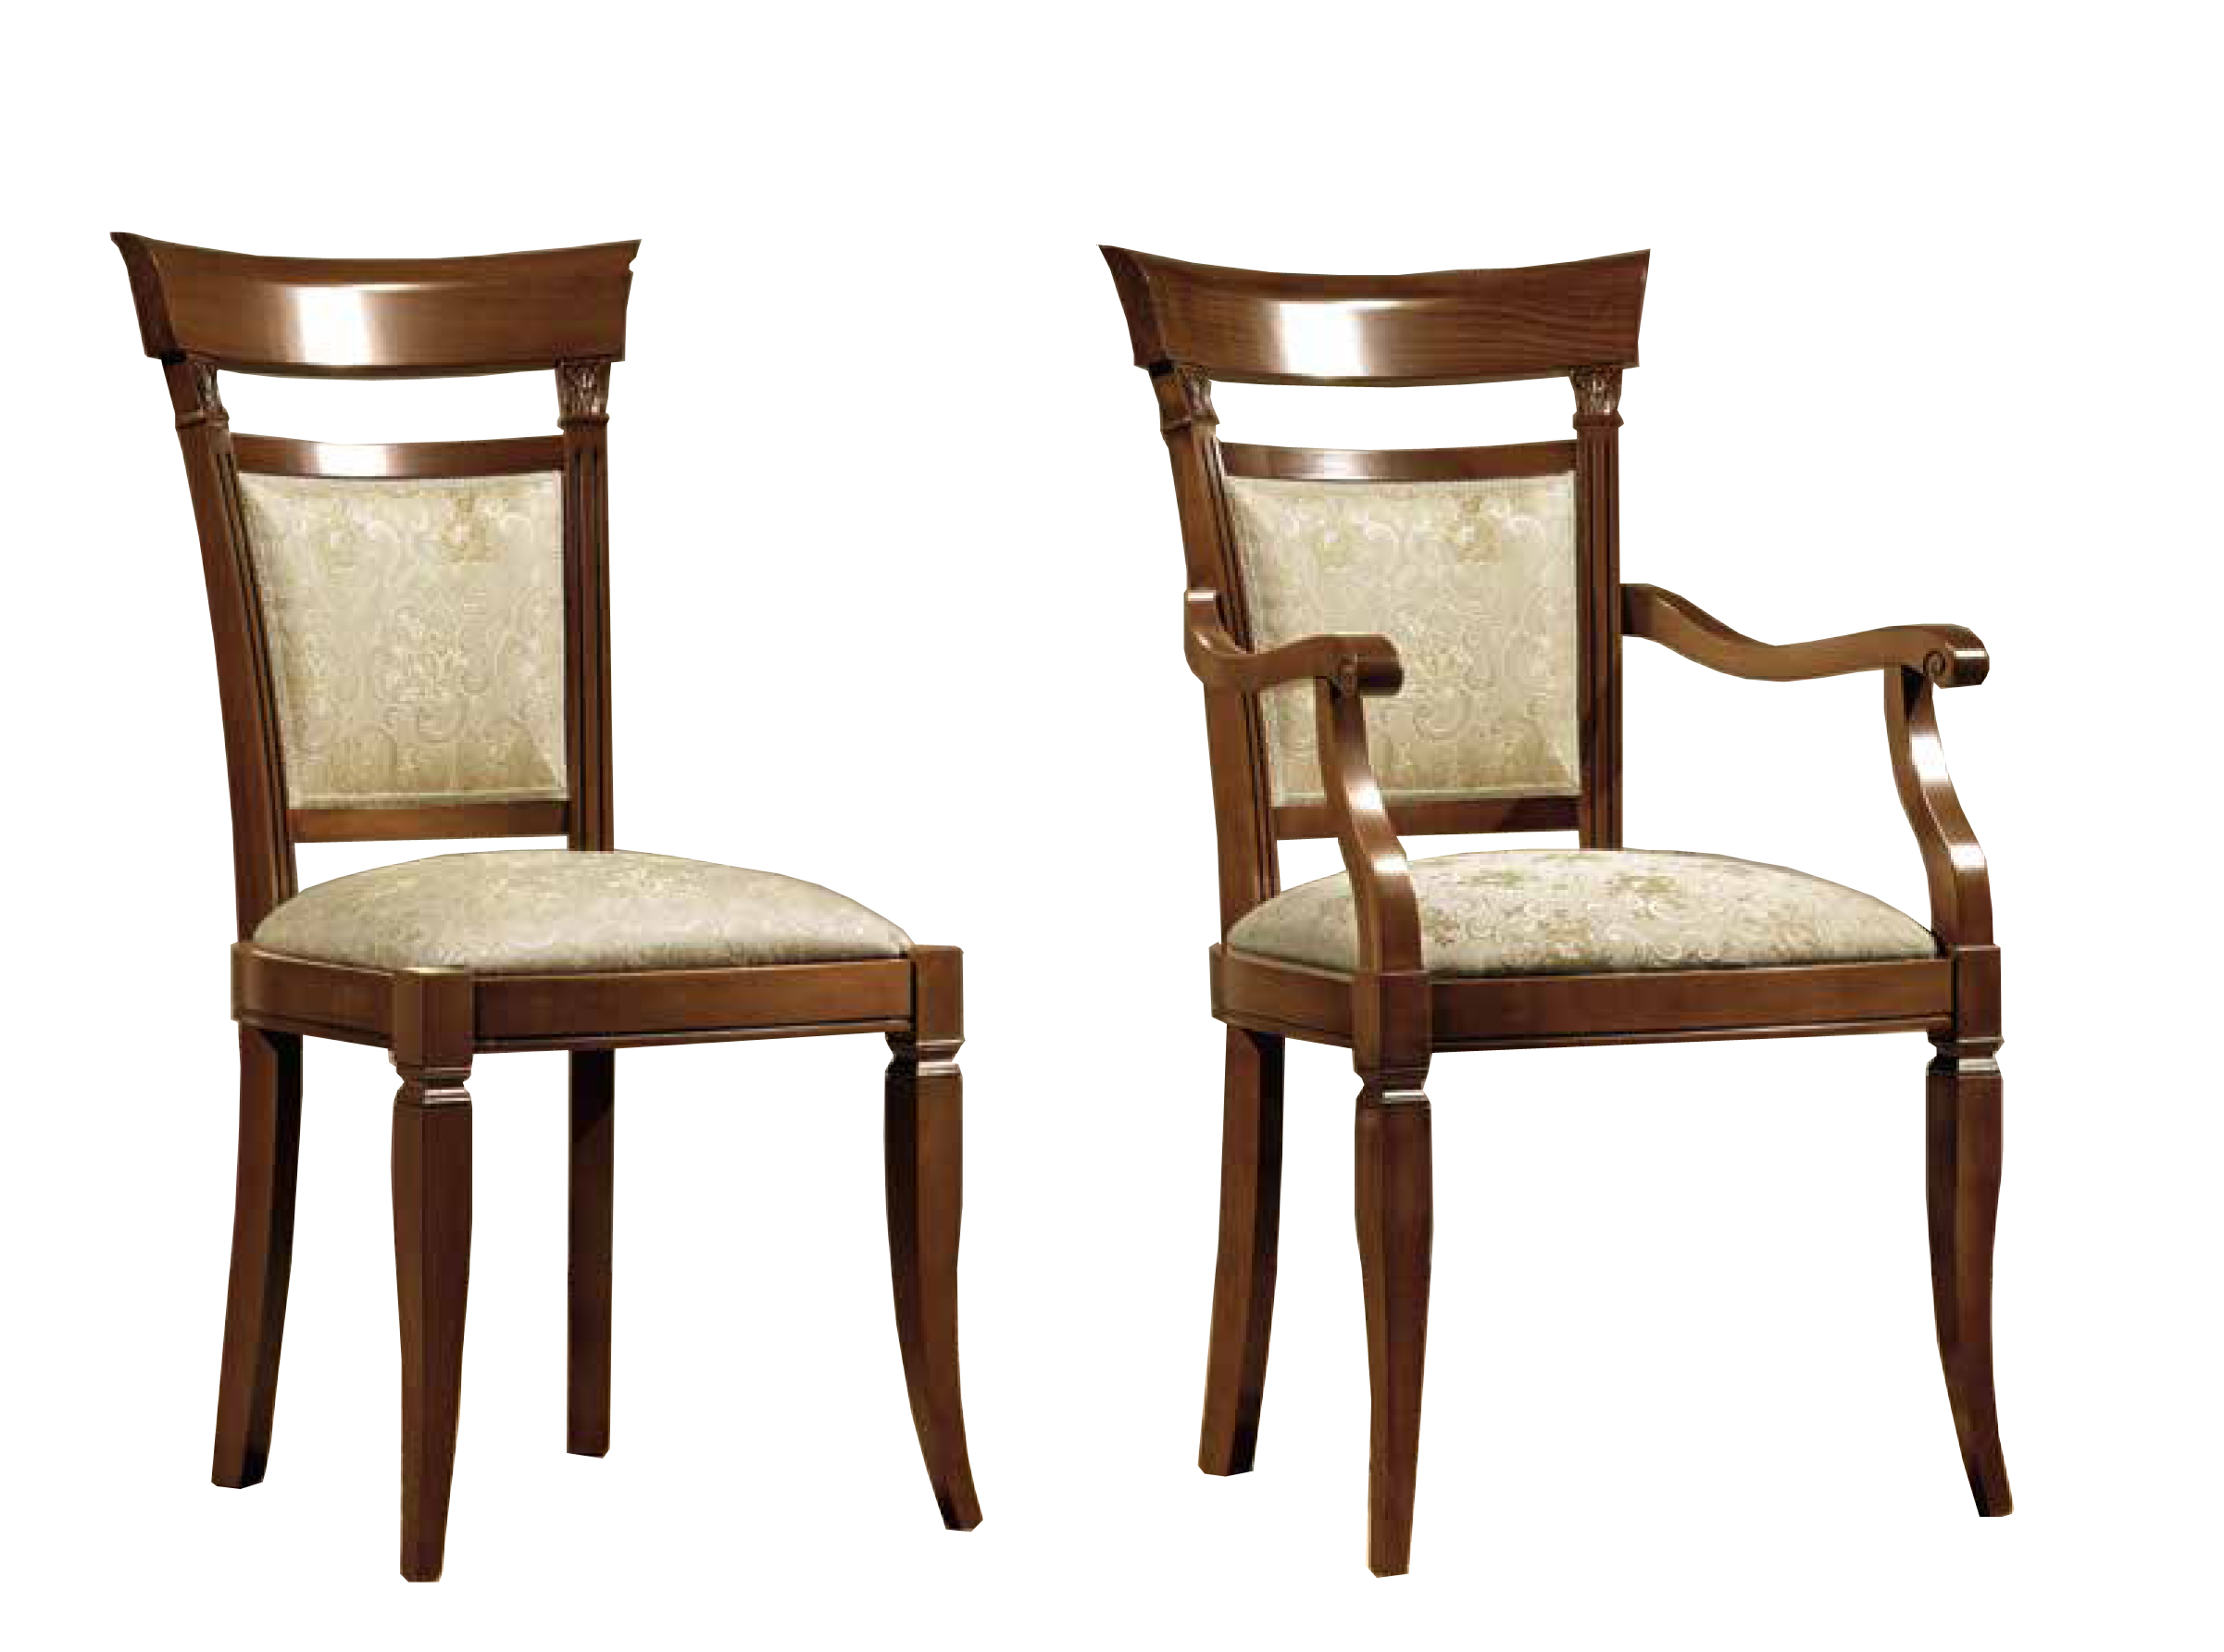 Brands Camel Classic Collection, Italy Treviso Chairs Cherry